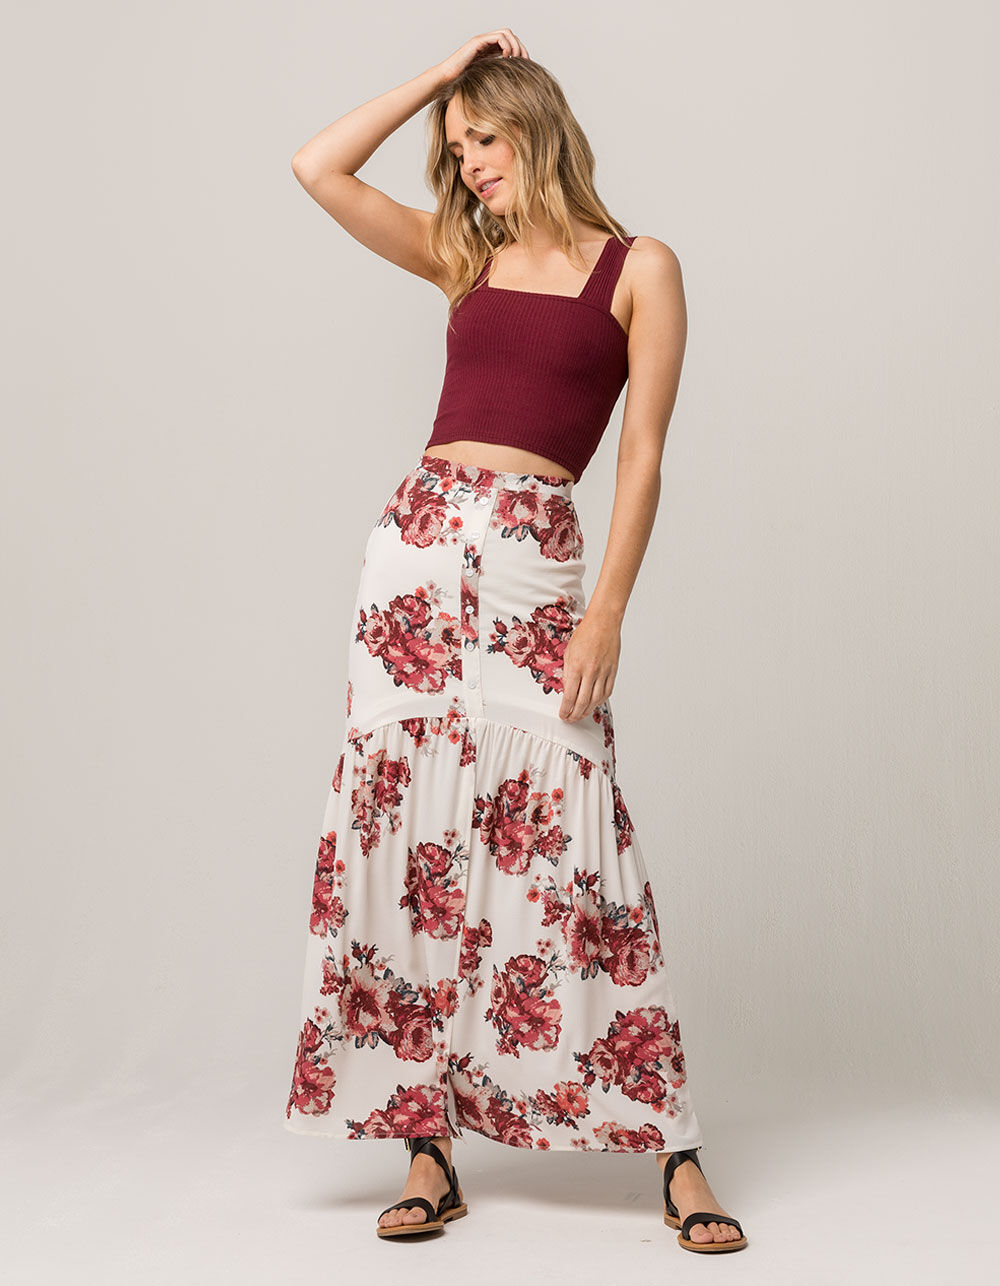 SKY AND SPARROW Rose Button Front Maxi Skirt - WHITE COMBO | Tillys